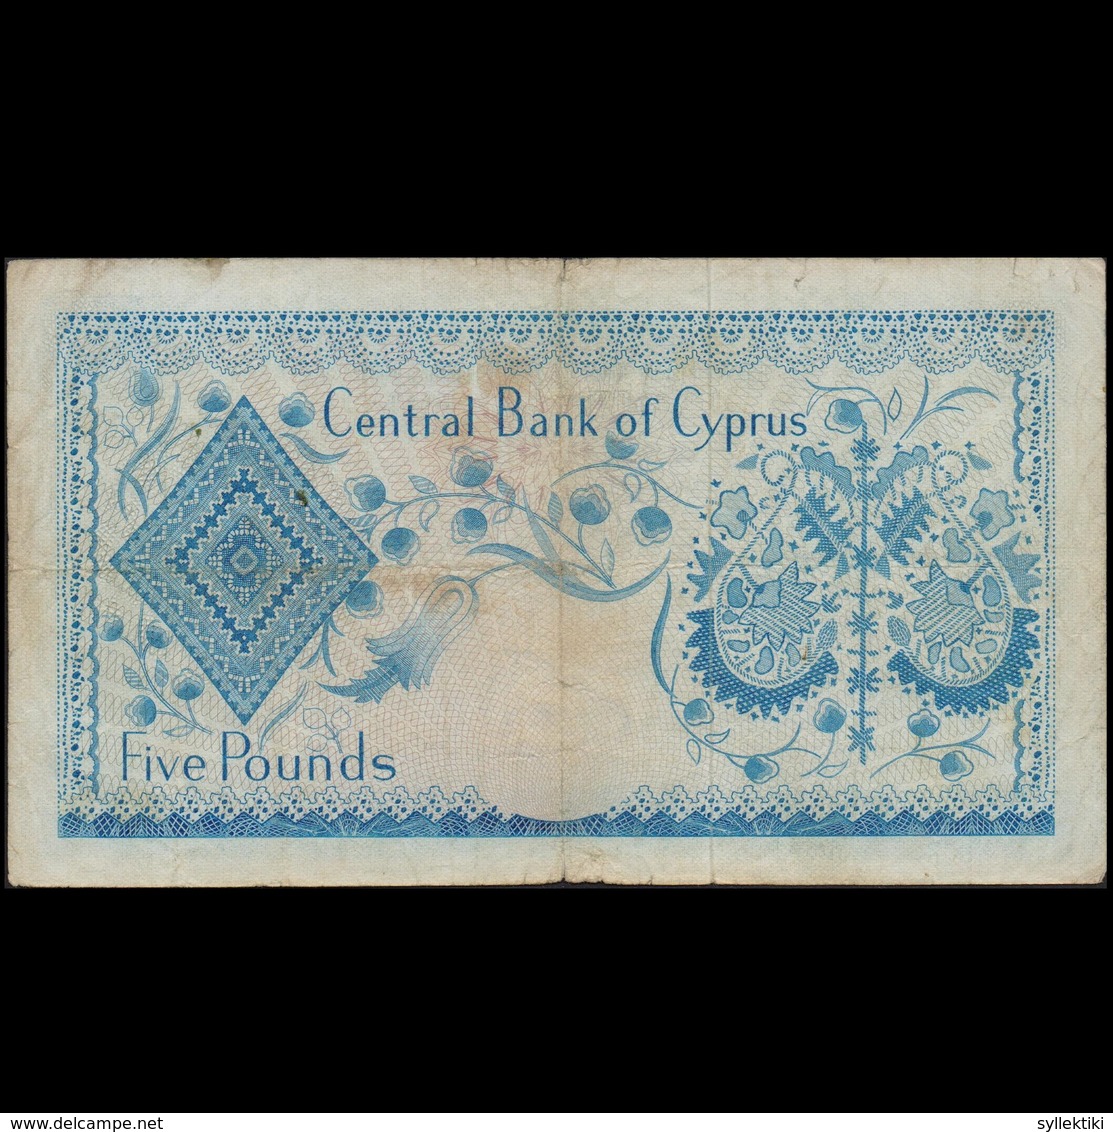 CYPRUS 1969 FIVE POUNDS BANKNOTE F+ - Chipre